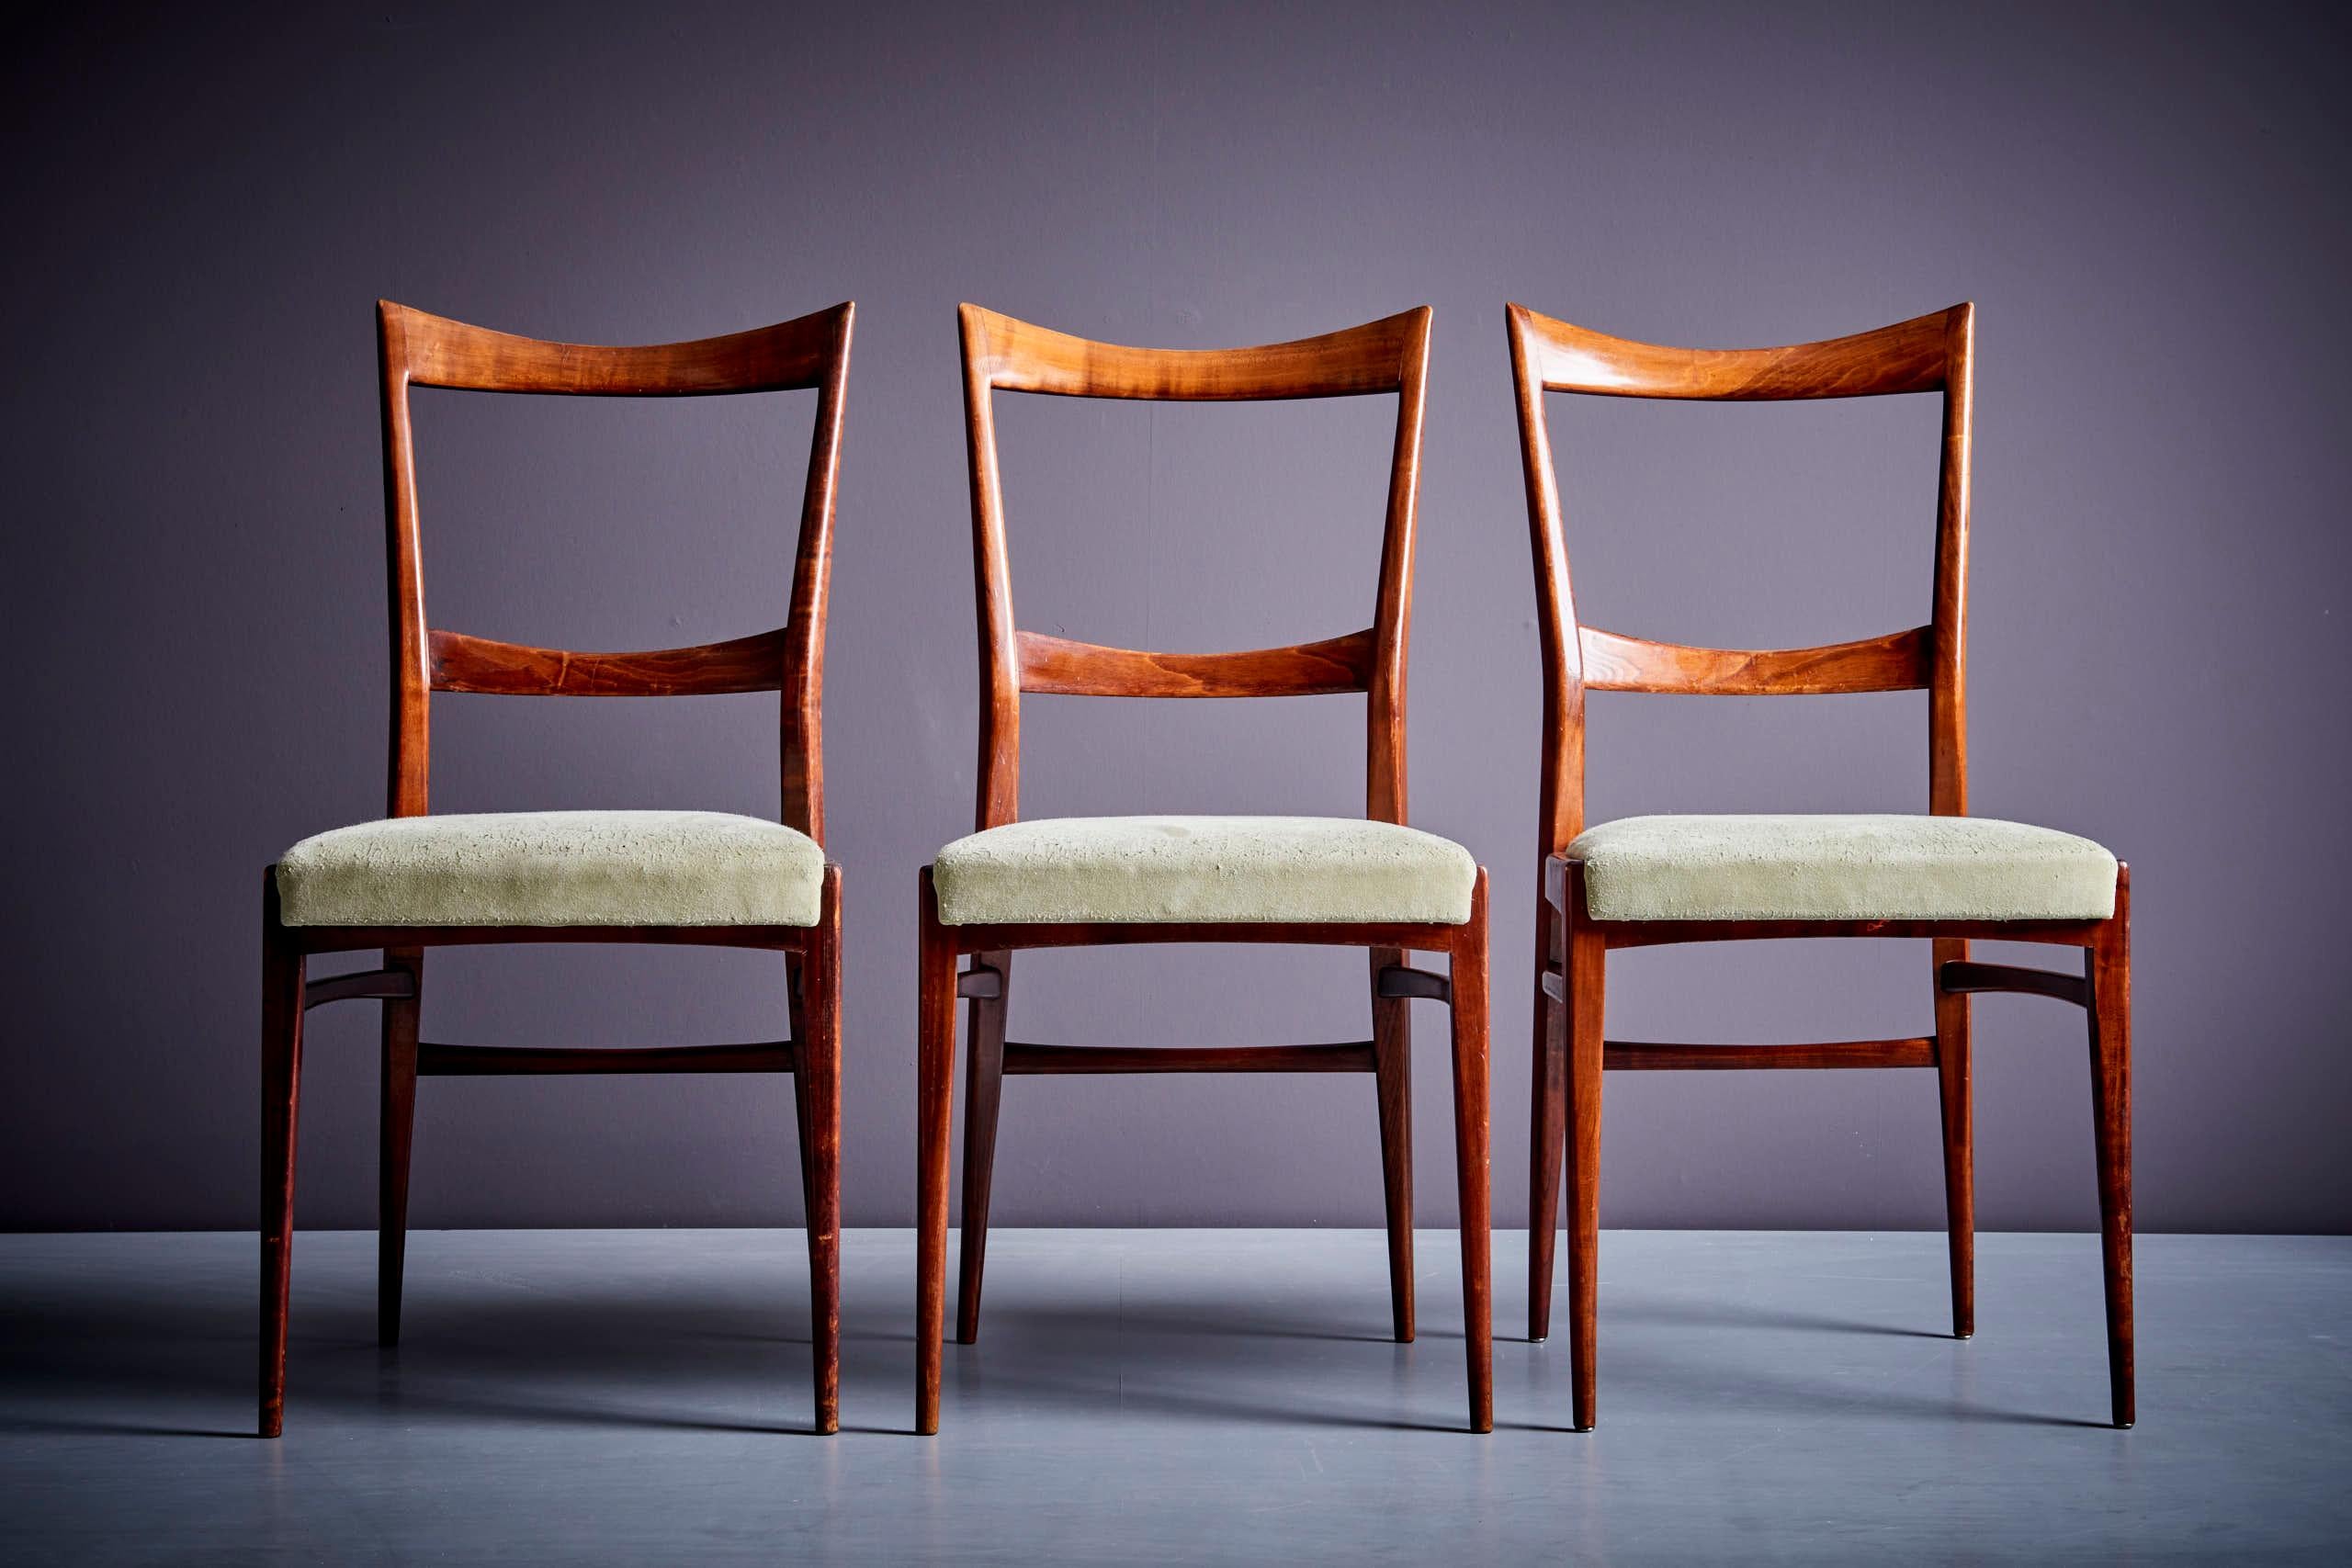 3 Dining Chairs in the manner of Ico Parisi, Italy - 1960s. Reupholstery option available in our in-house atelier. Please ask for a quote.